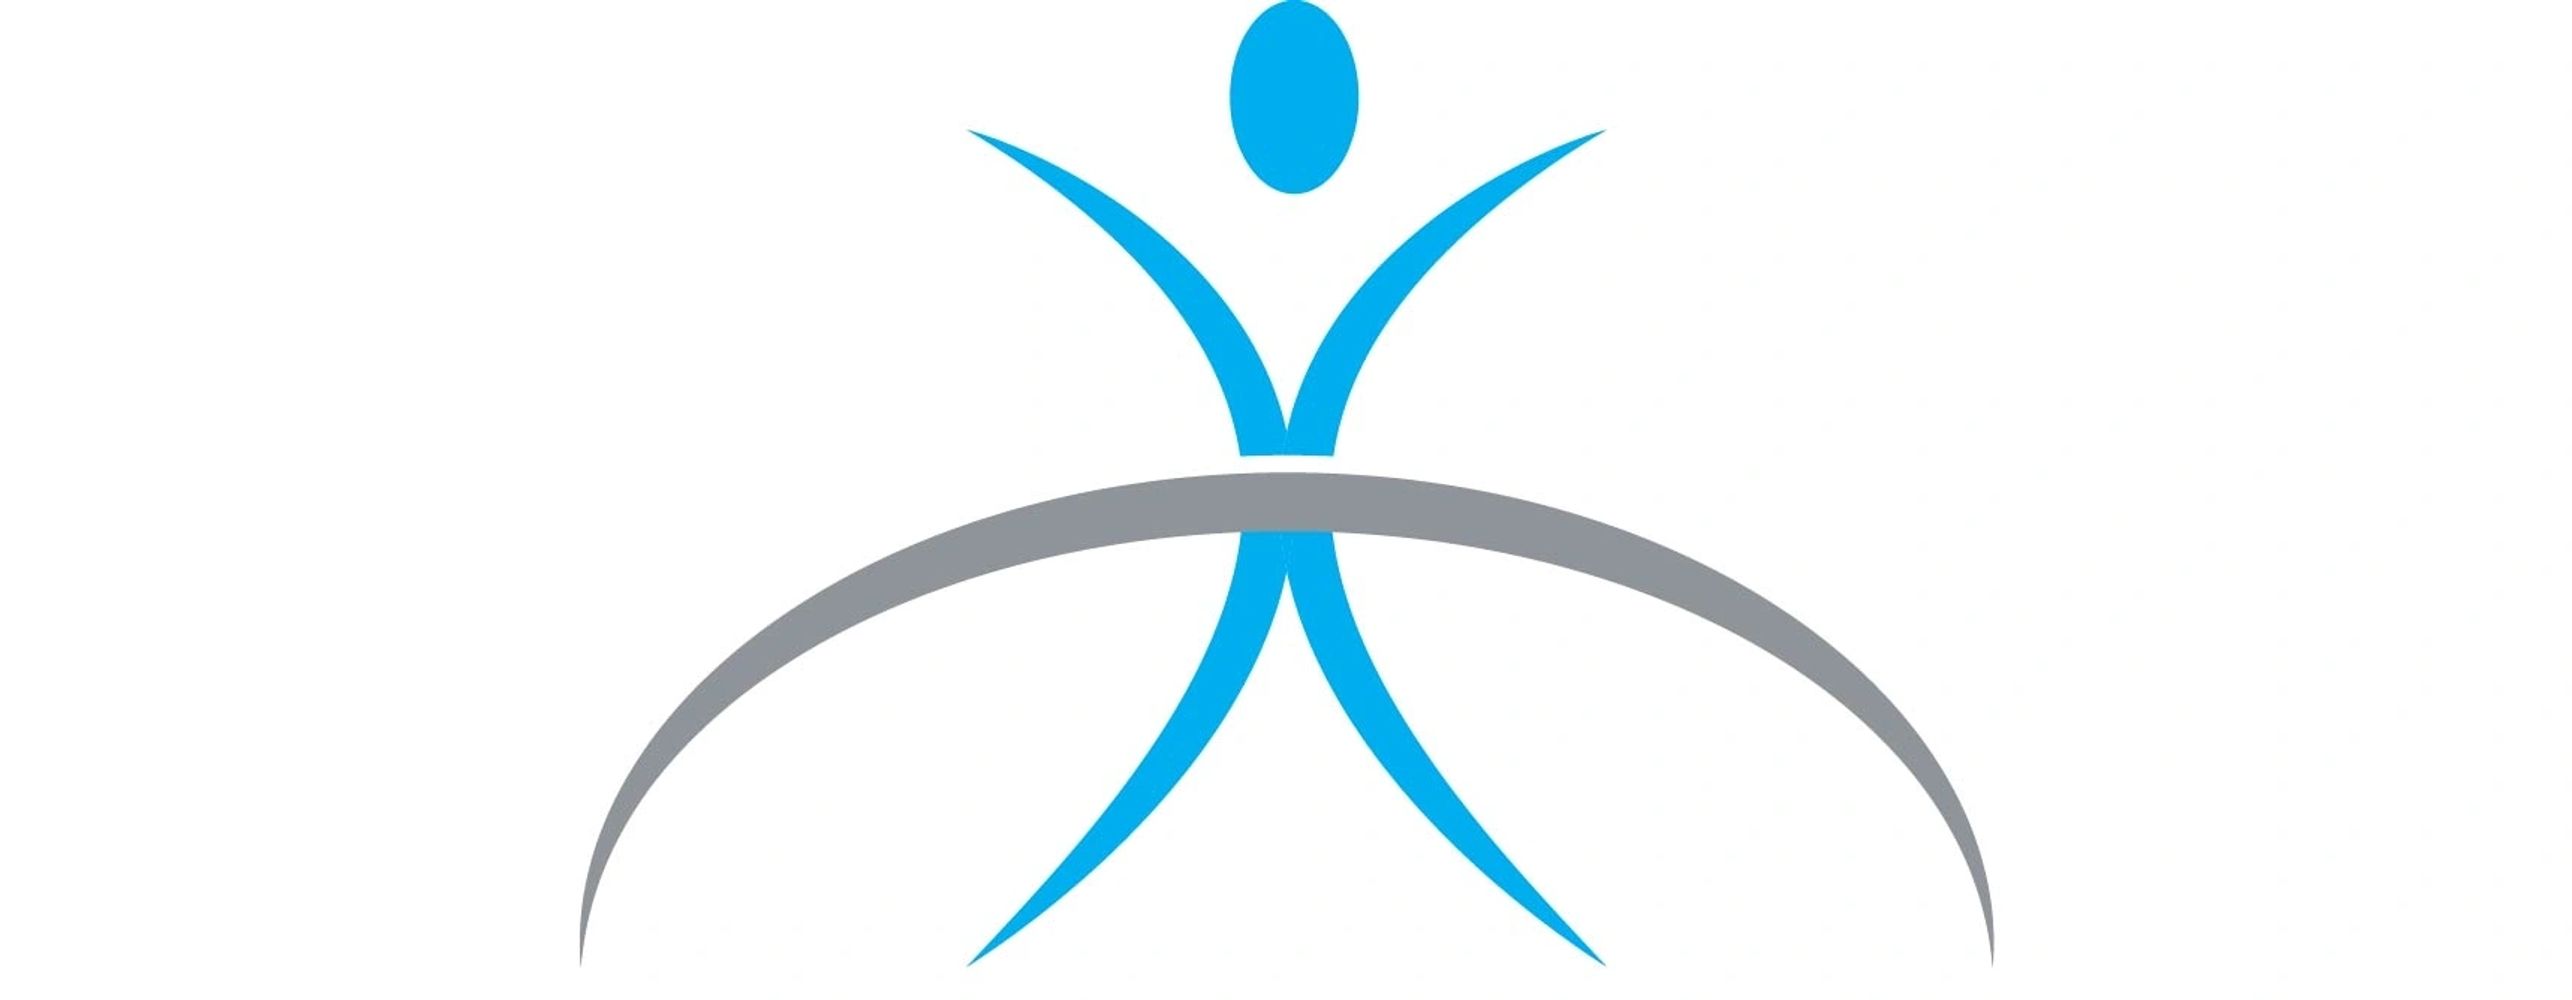 The blue and gray logo for LearnEarnRetire